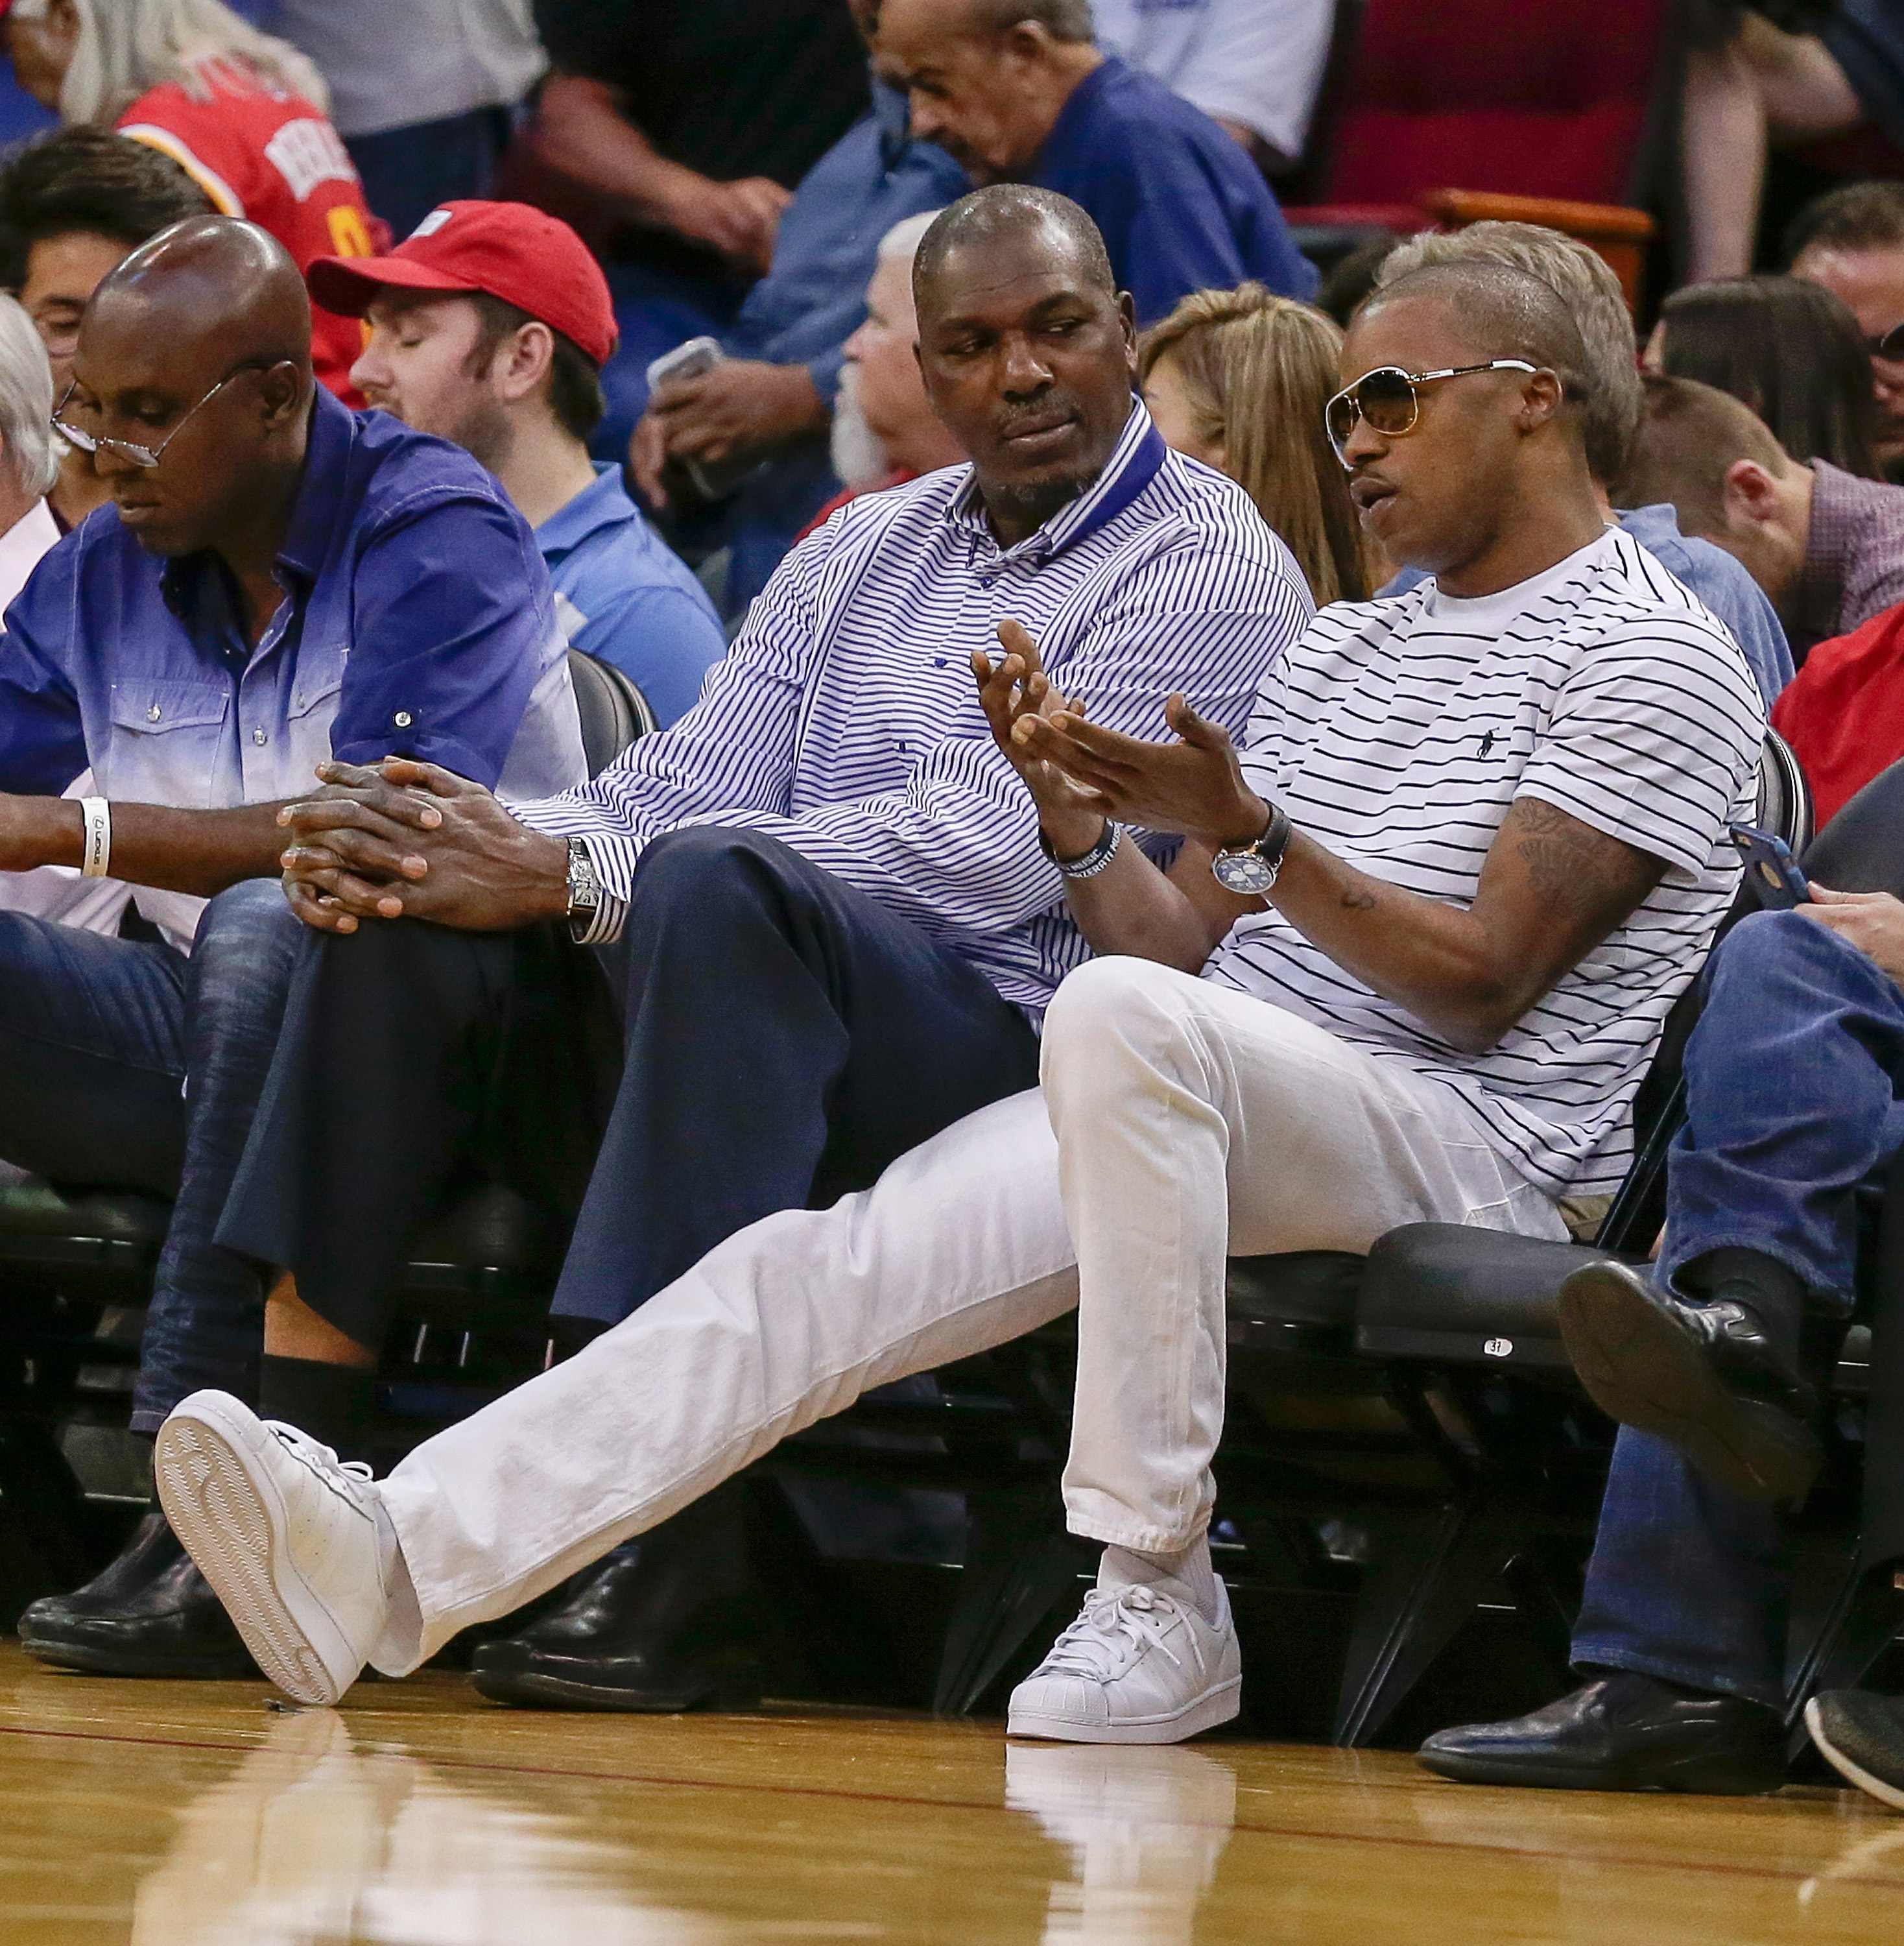 Former Houston Rockets teammates Hakeem Olajuwon and Steve Francis watch in NBA game in 2016